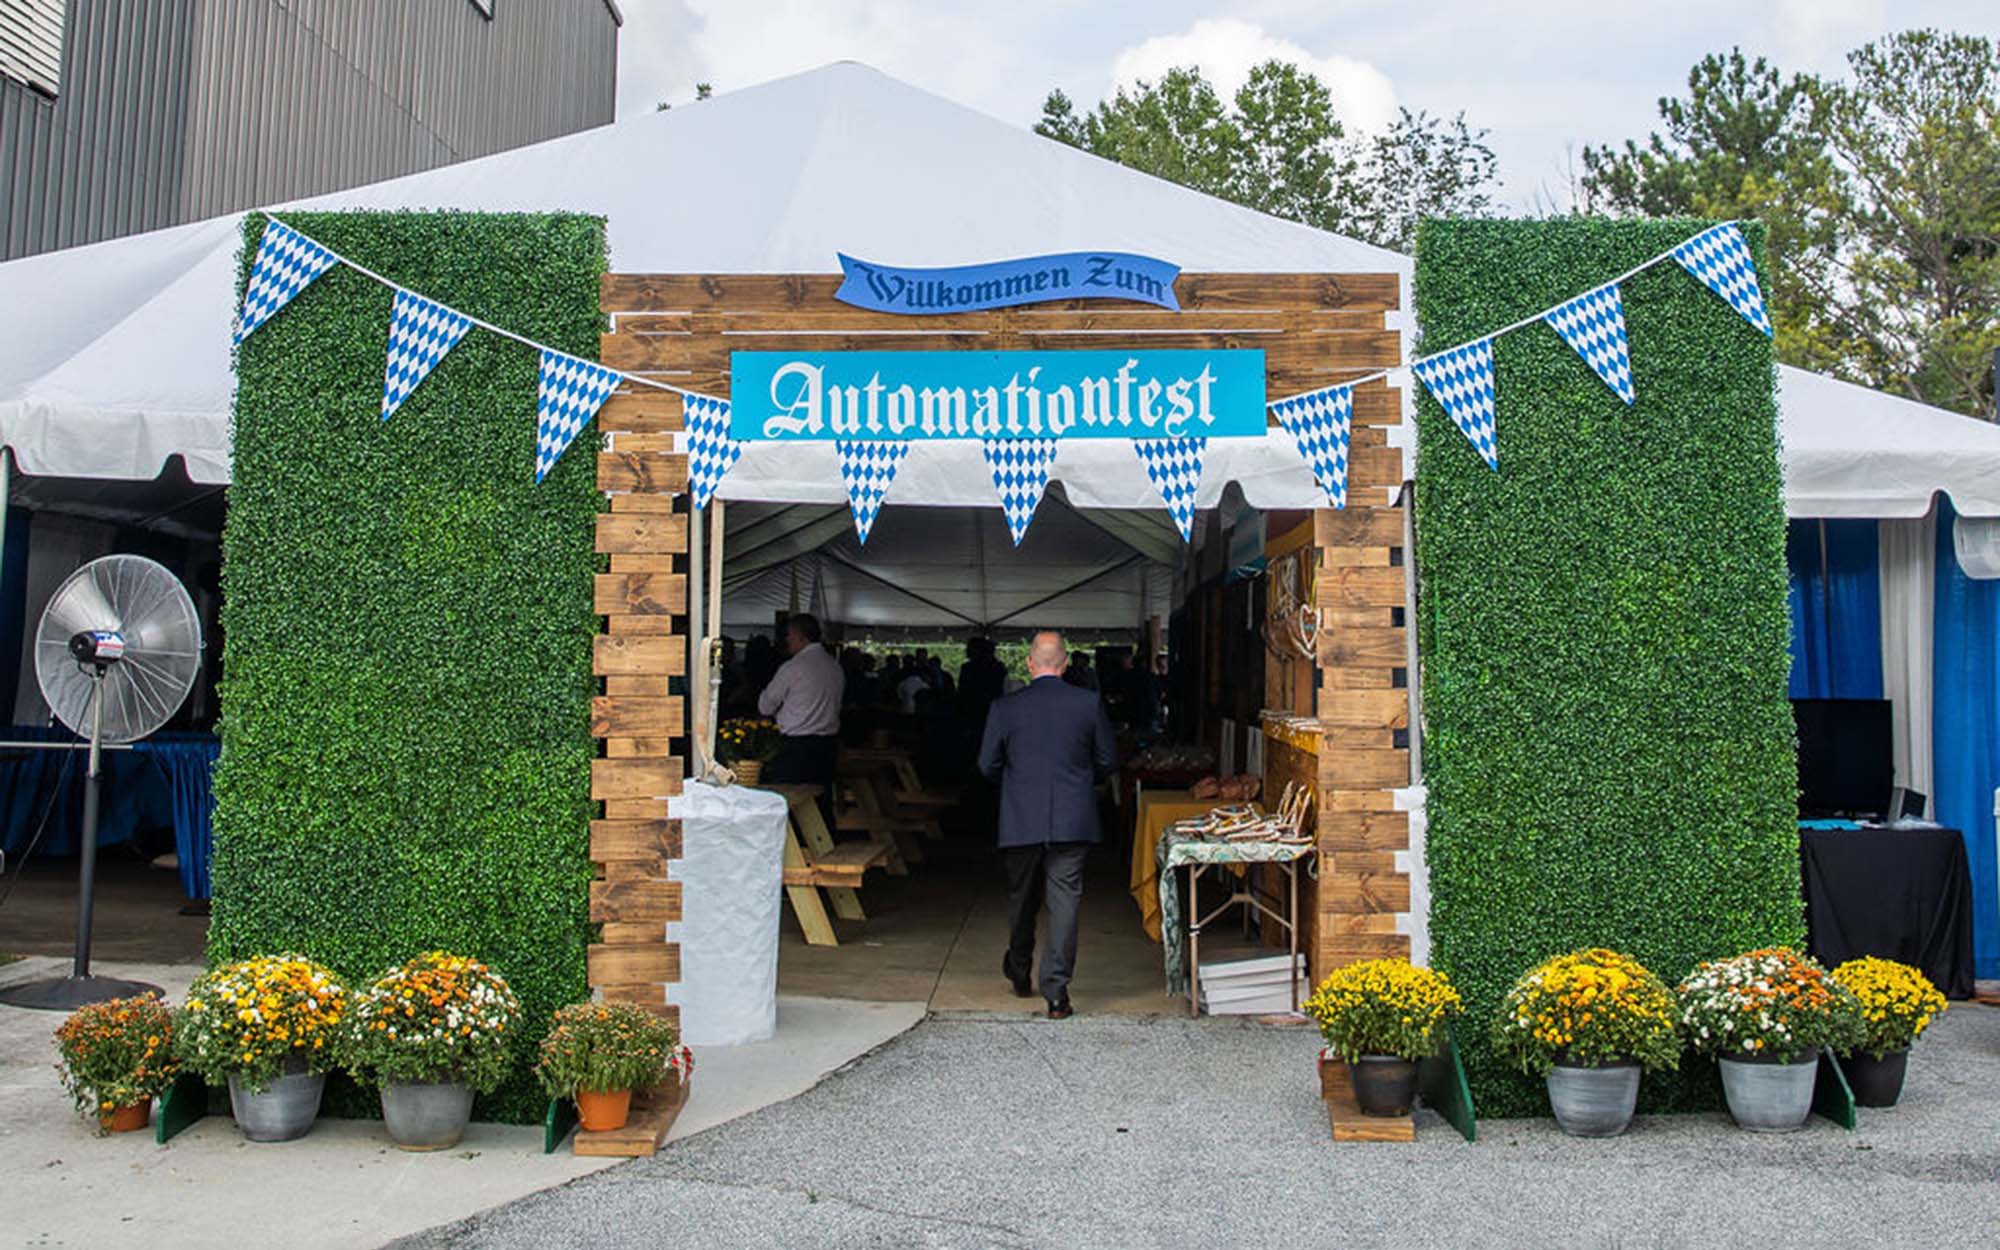 Welcome to Automationfest 2021!